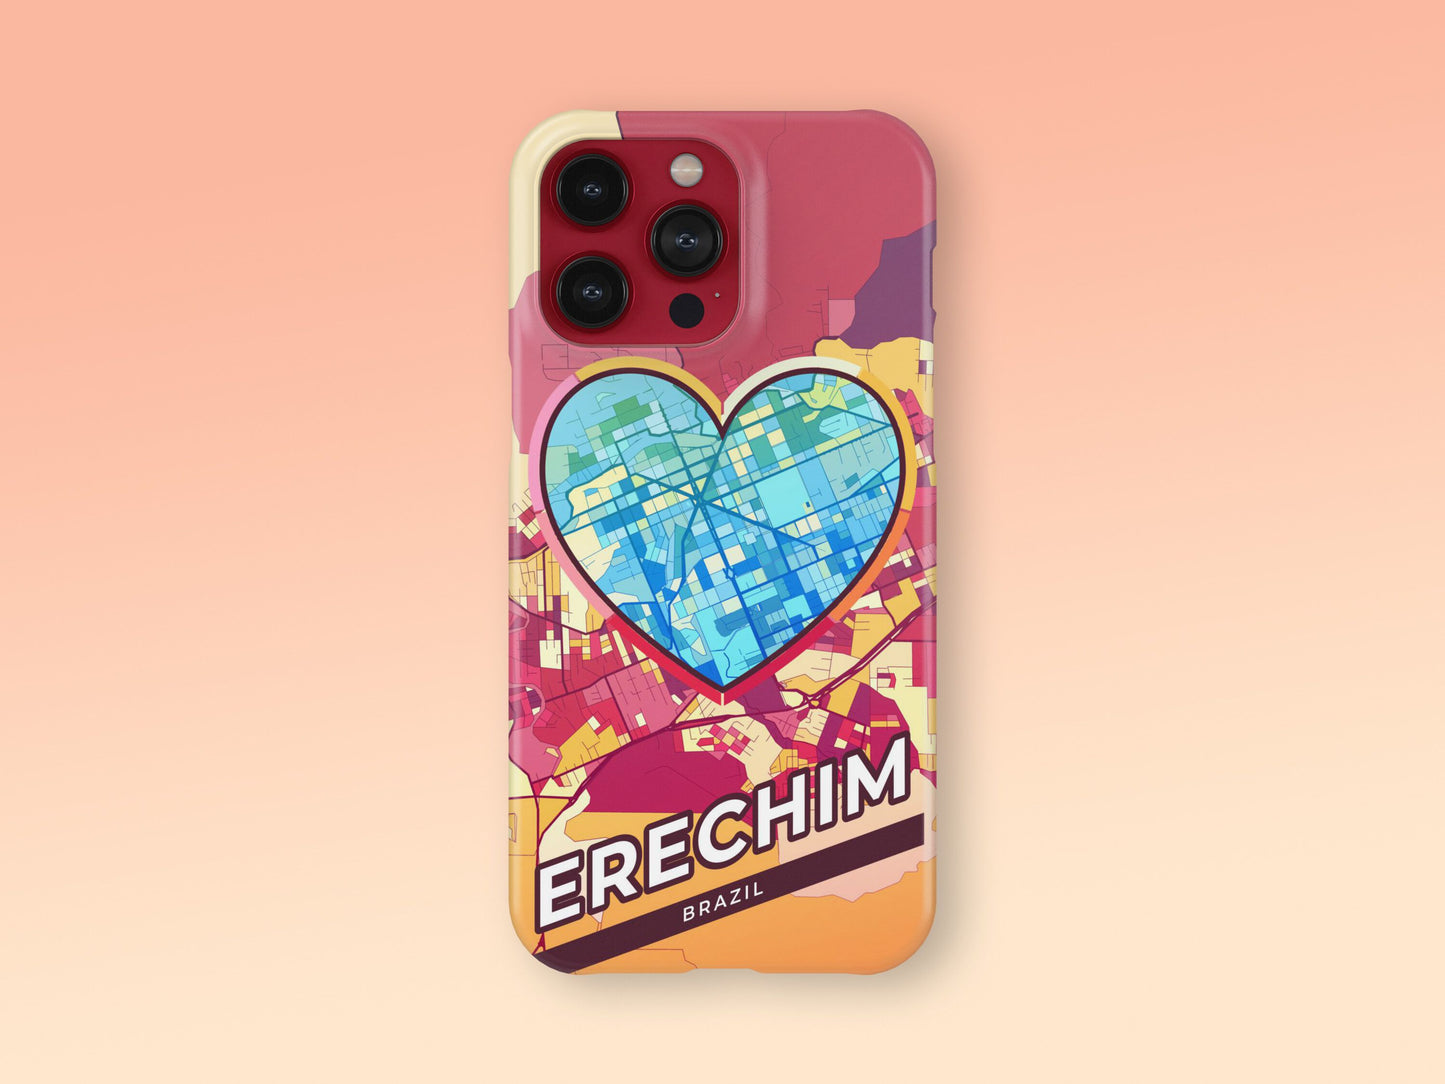 Erechim Brazil slim phone case with colorful icon. Birthday, wedding or housewarming gift. Couple match cases. 2